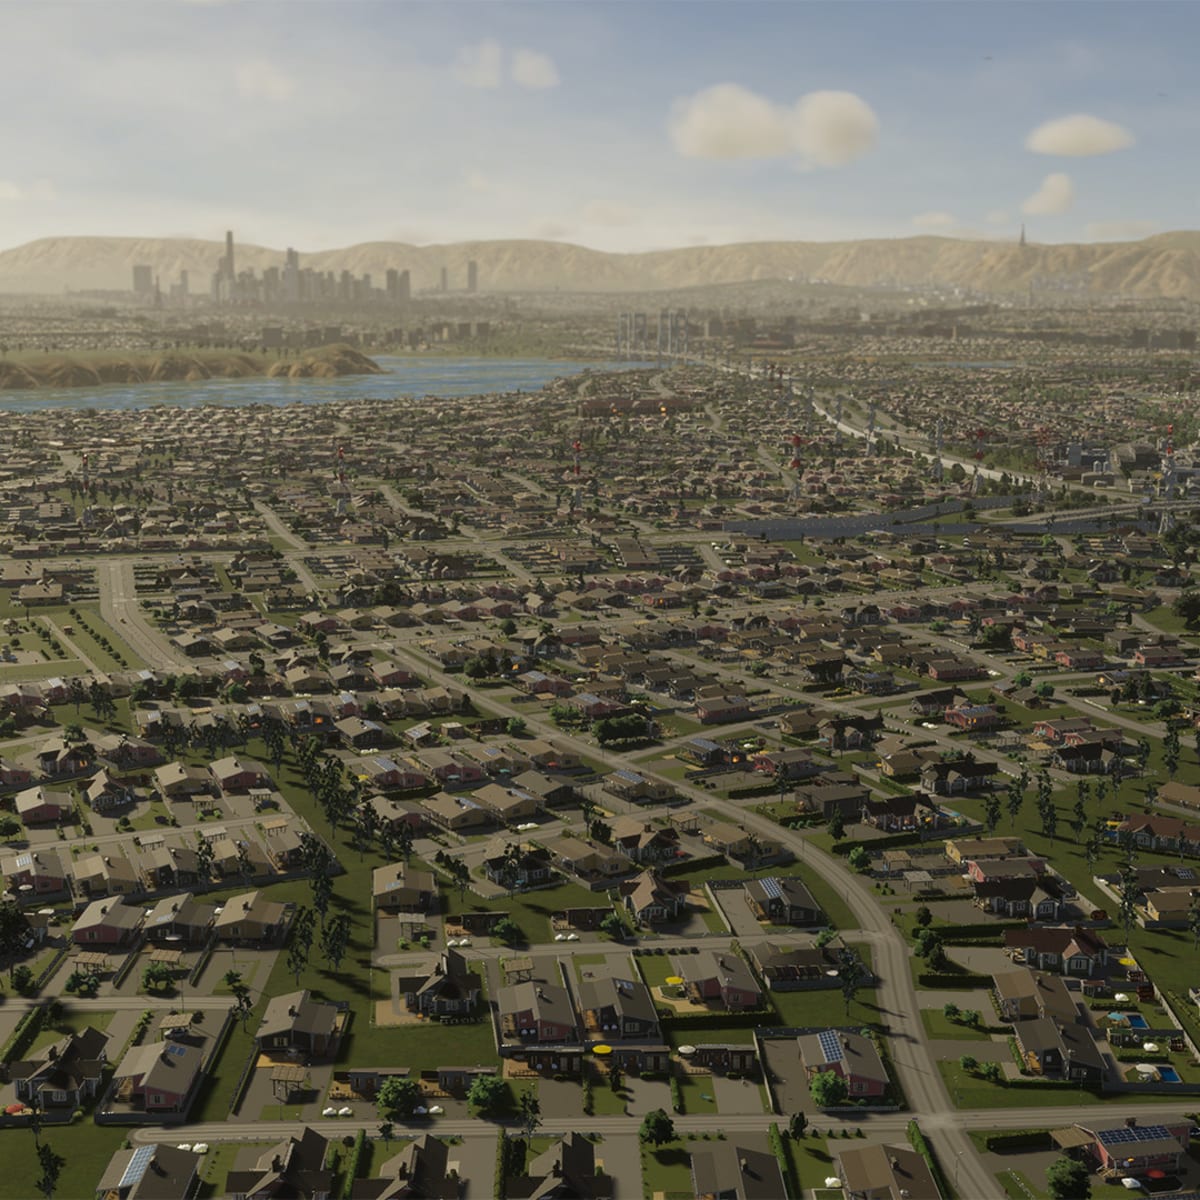 Cities Skylines 2 Release Date - Gameplay, Trailer, Story